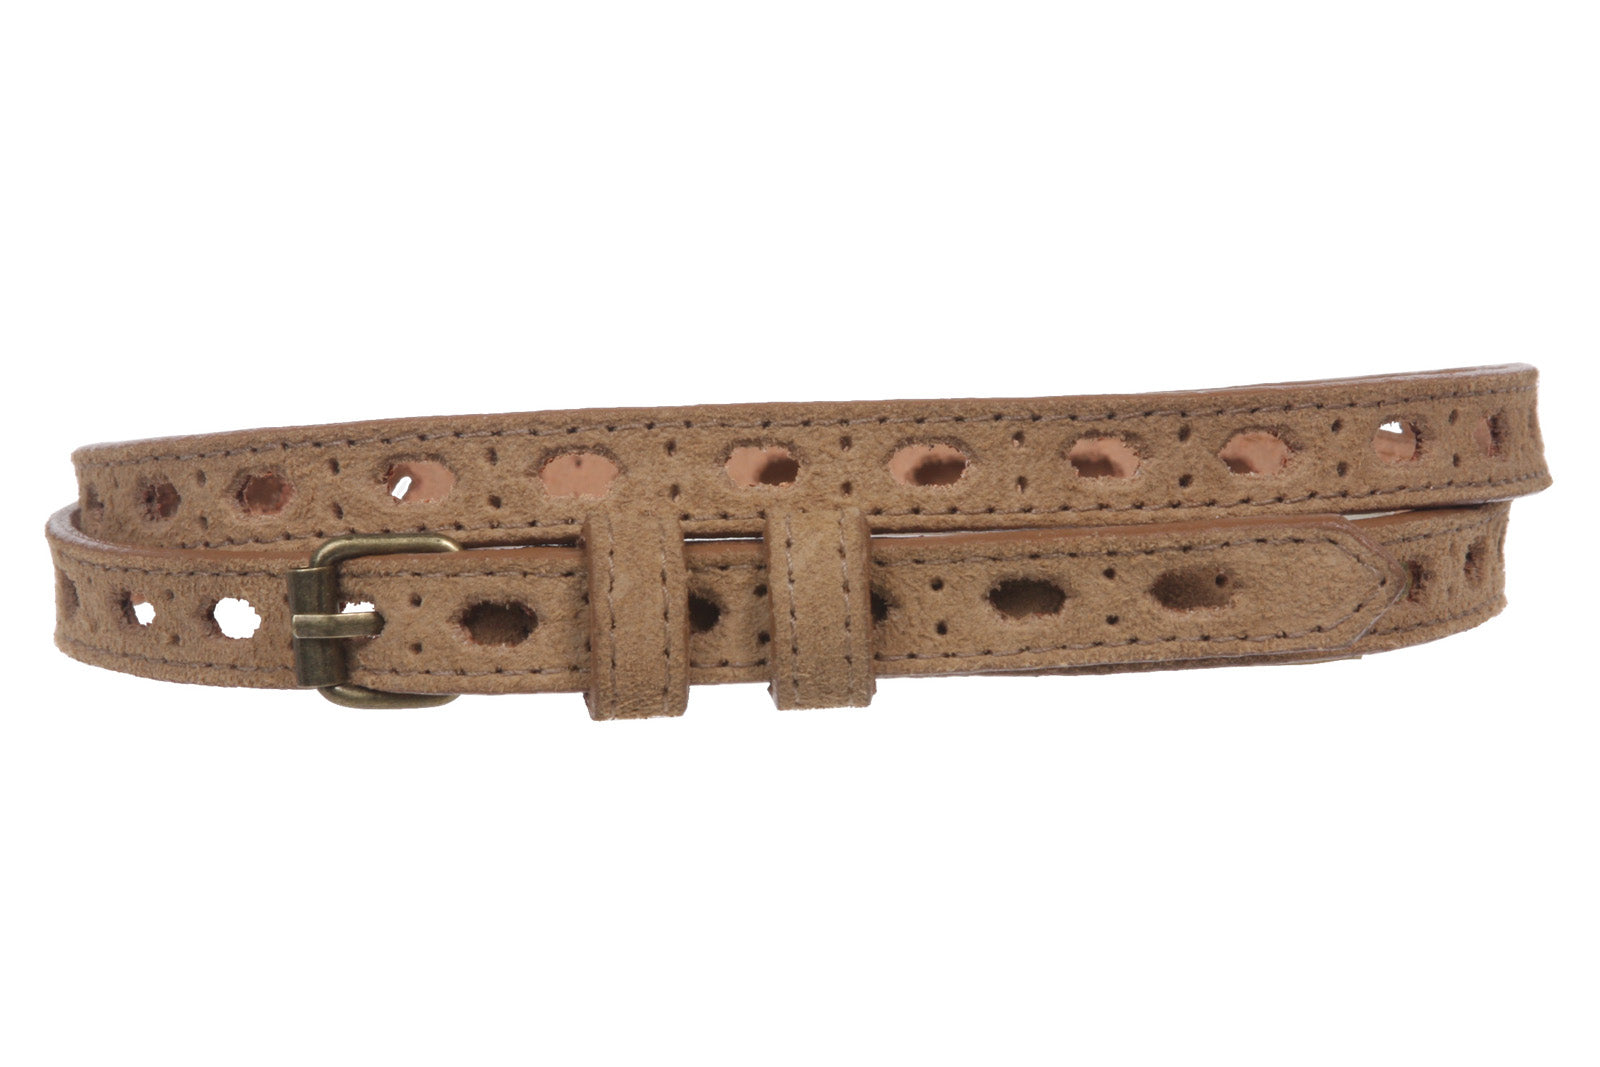 Women's 1/2" (12mm) Skinny Stitching Perforated Leather Belt